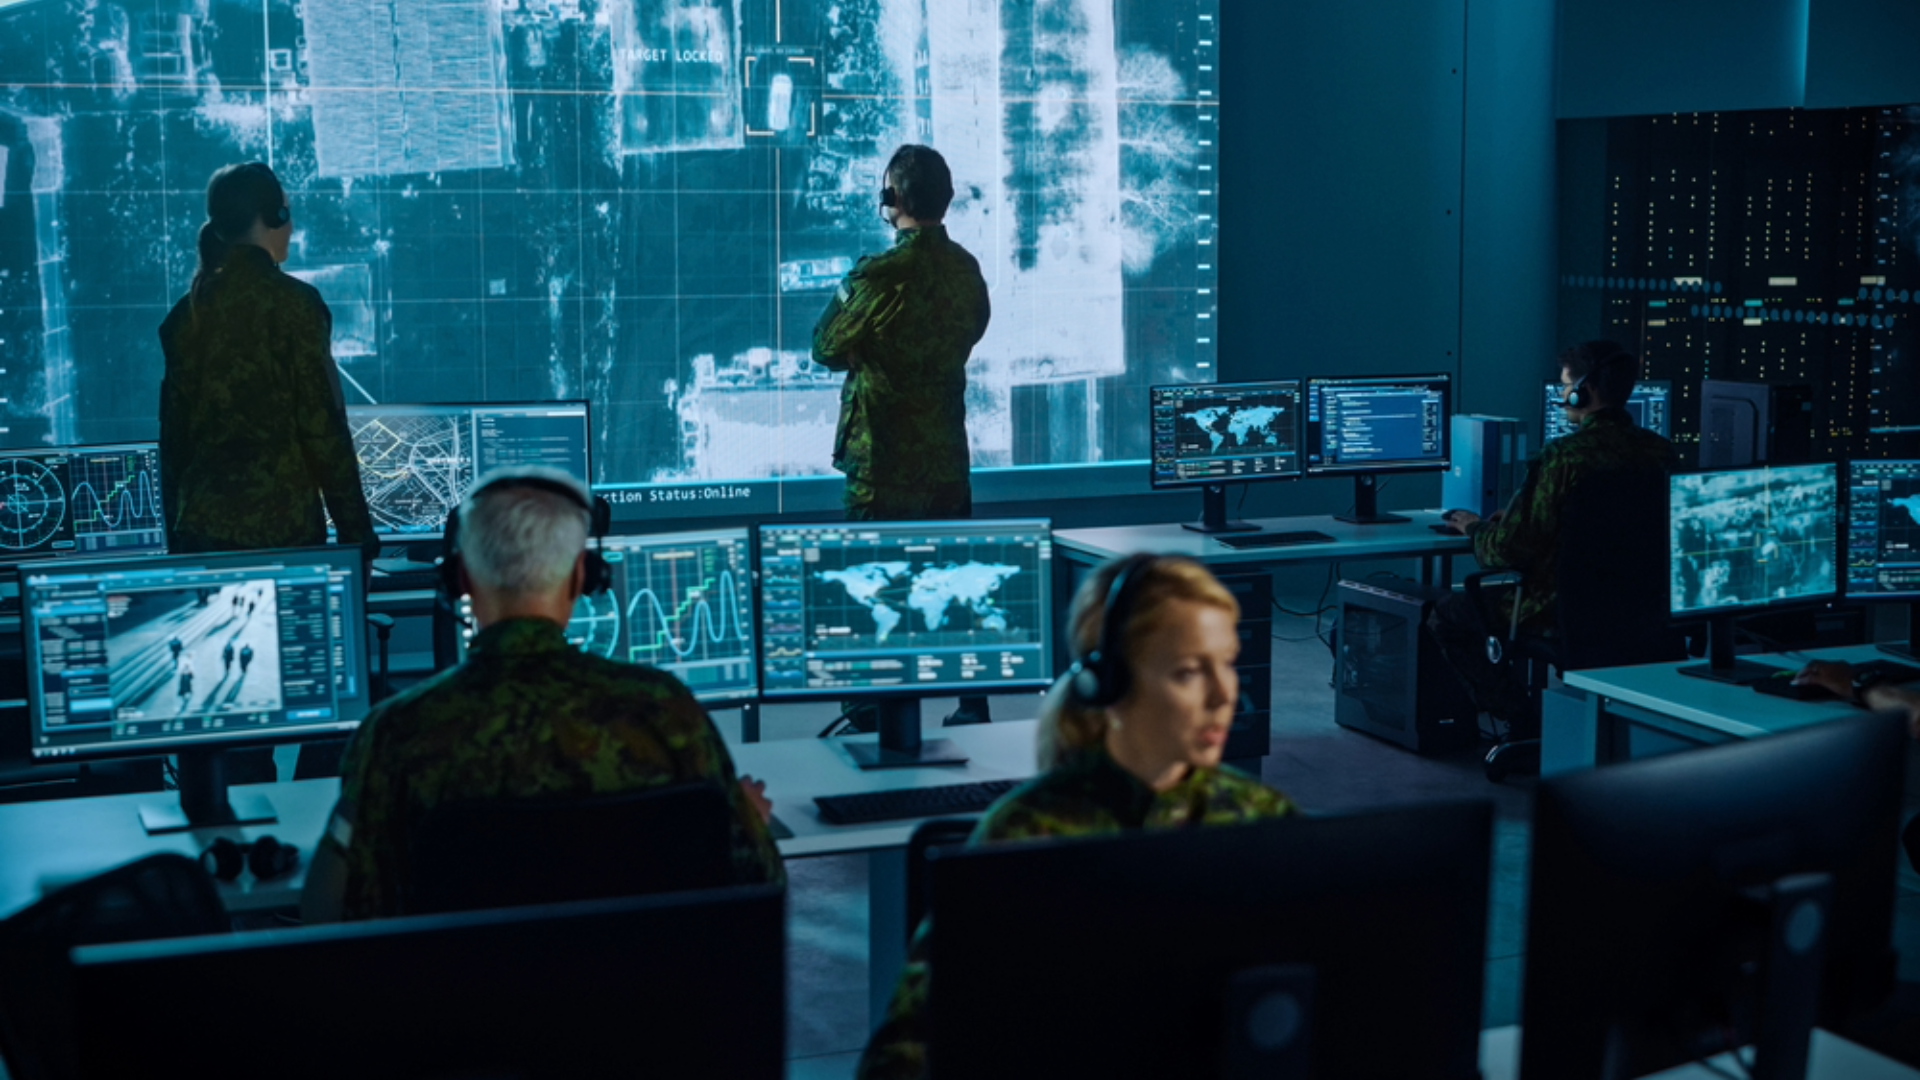 EDA Command and Control projects aims to strengthen support to CSDP missions and operations